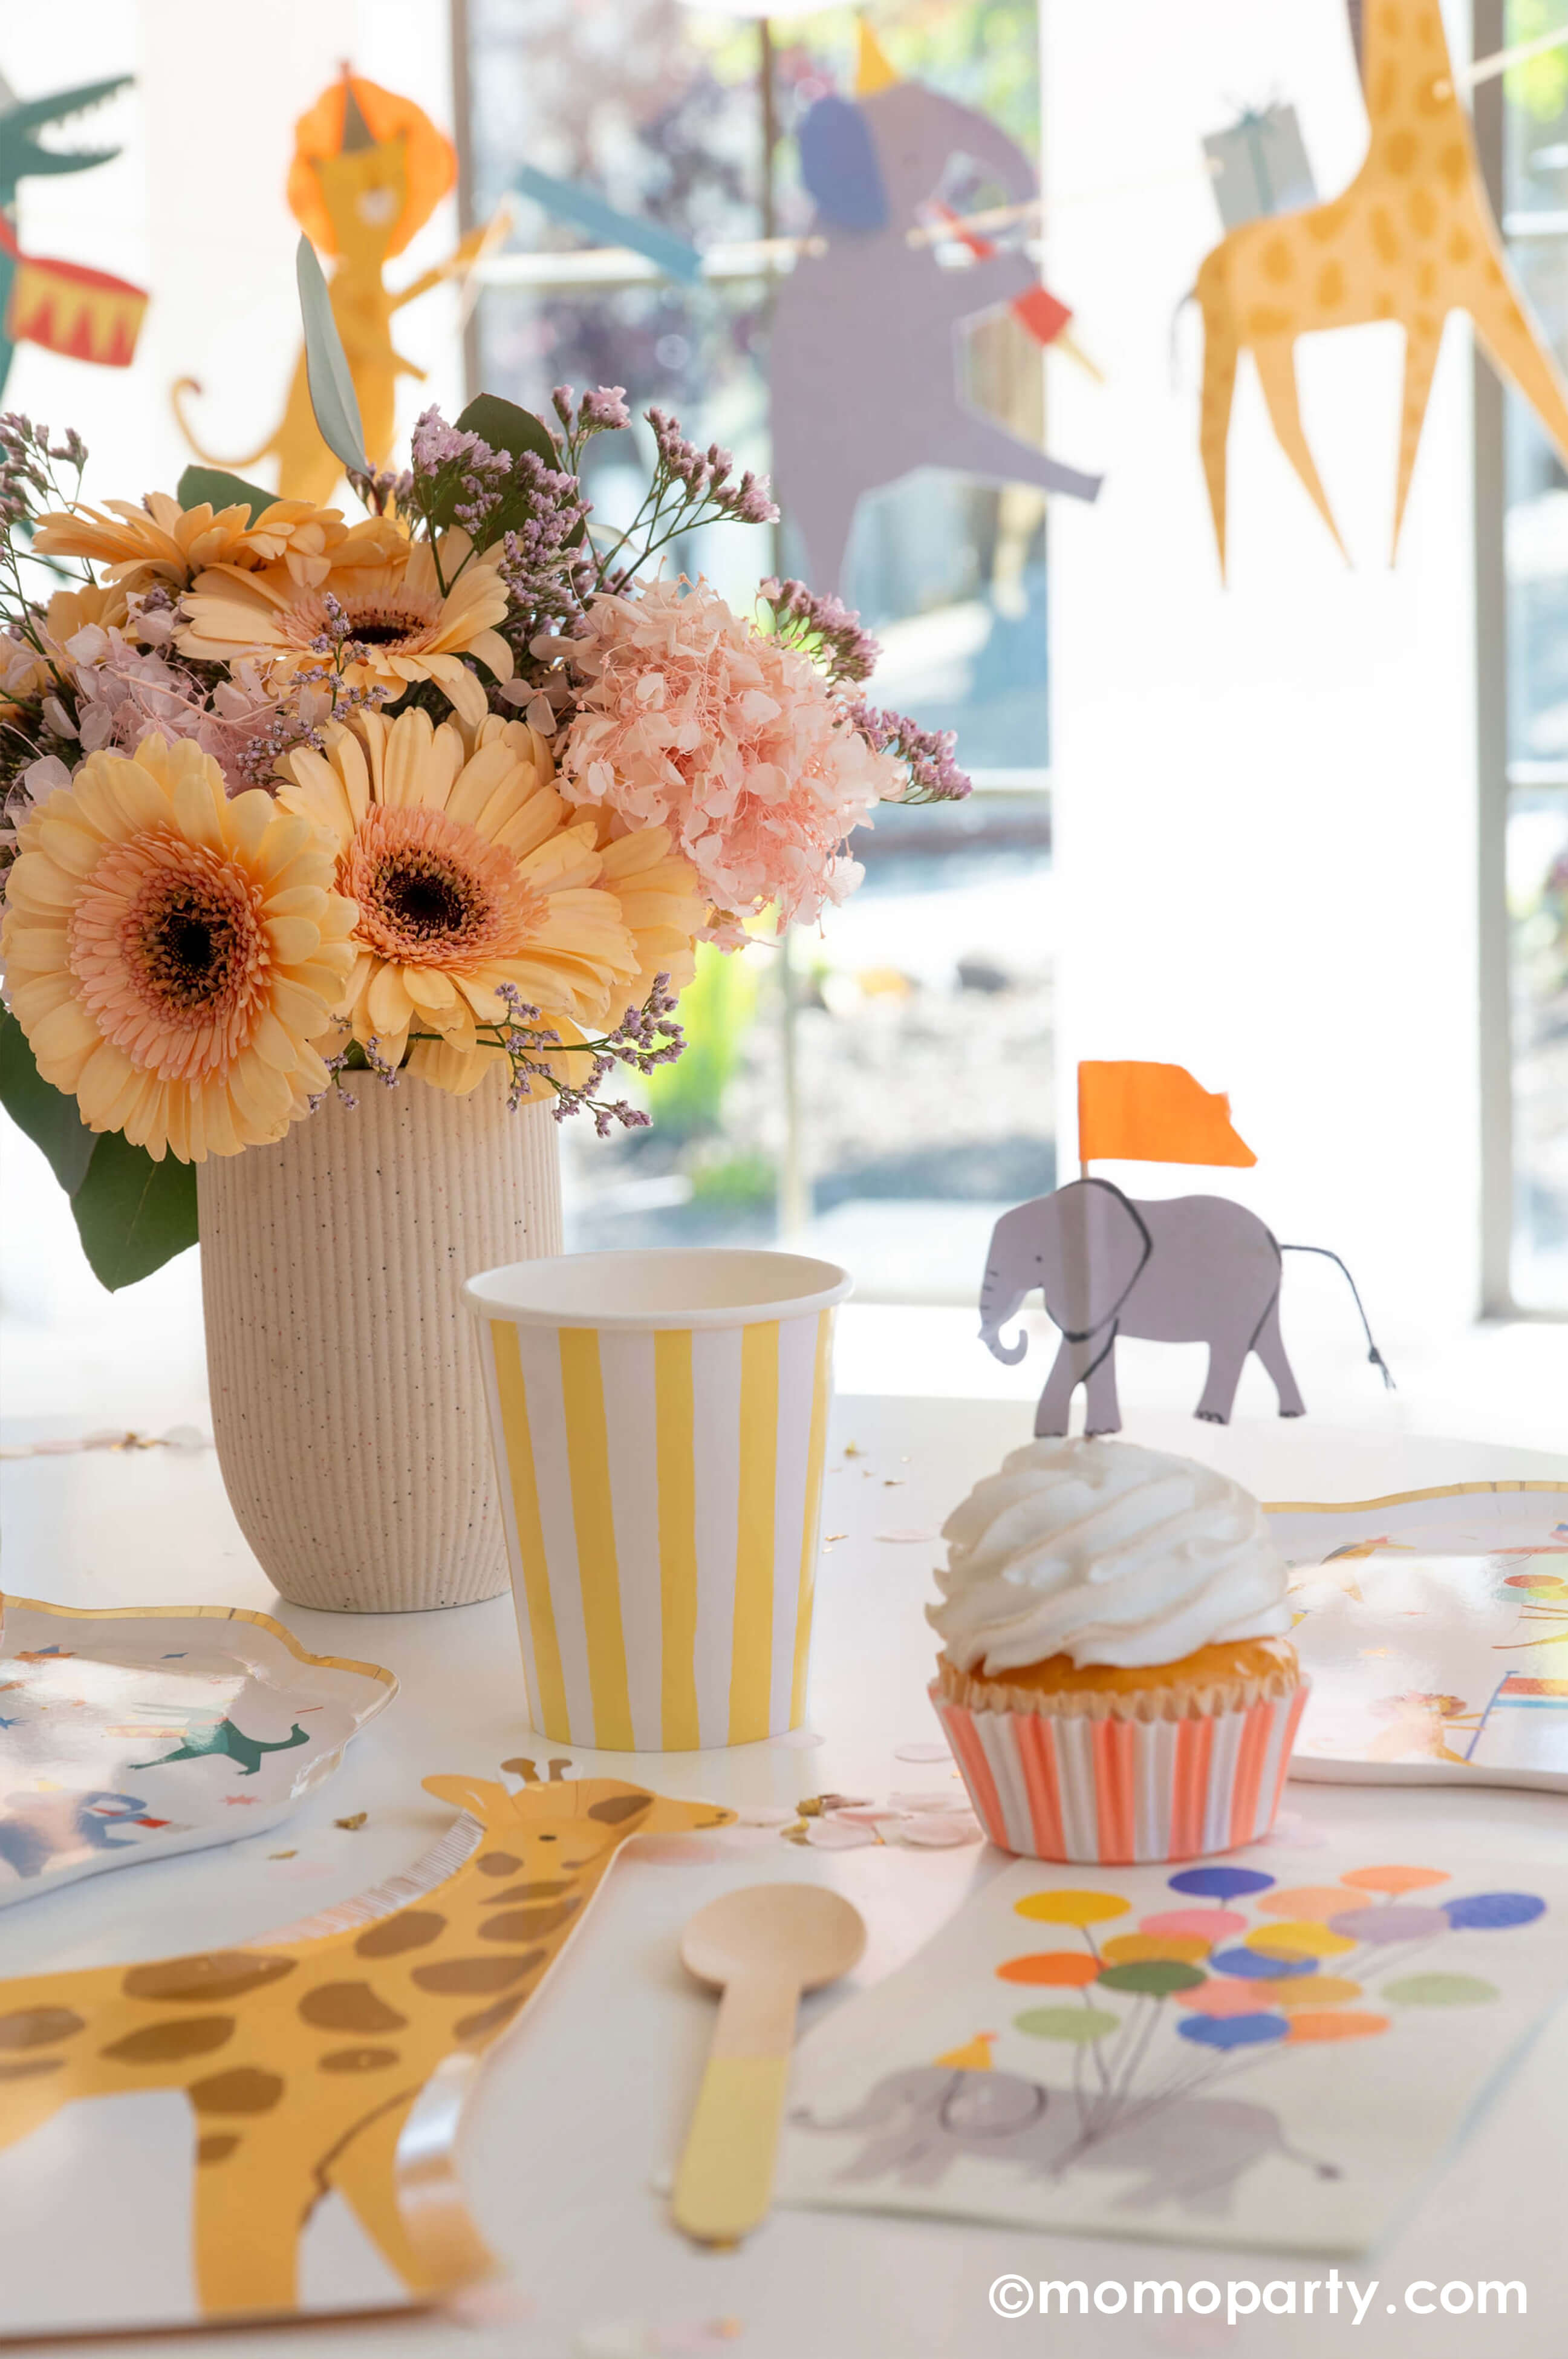 A kid's animal themed party table featuring Momo Party's Animal Parade Dinner plate, a giraffe shaped plate for cakes, light yellow striped cups and safari animal cake toppers featuring cheetah and flamingo by Meri Meri, along with a beautiful spring flower arrangement as the centerpiece and a fun animal parade birthday garland in the back, it makes a great party inspiration for kid's animal, safari, carnival themed birthday party.